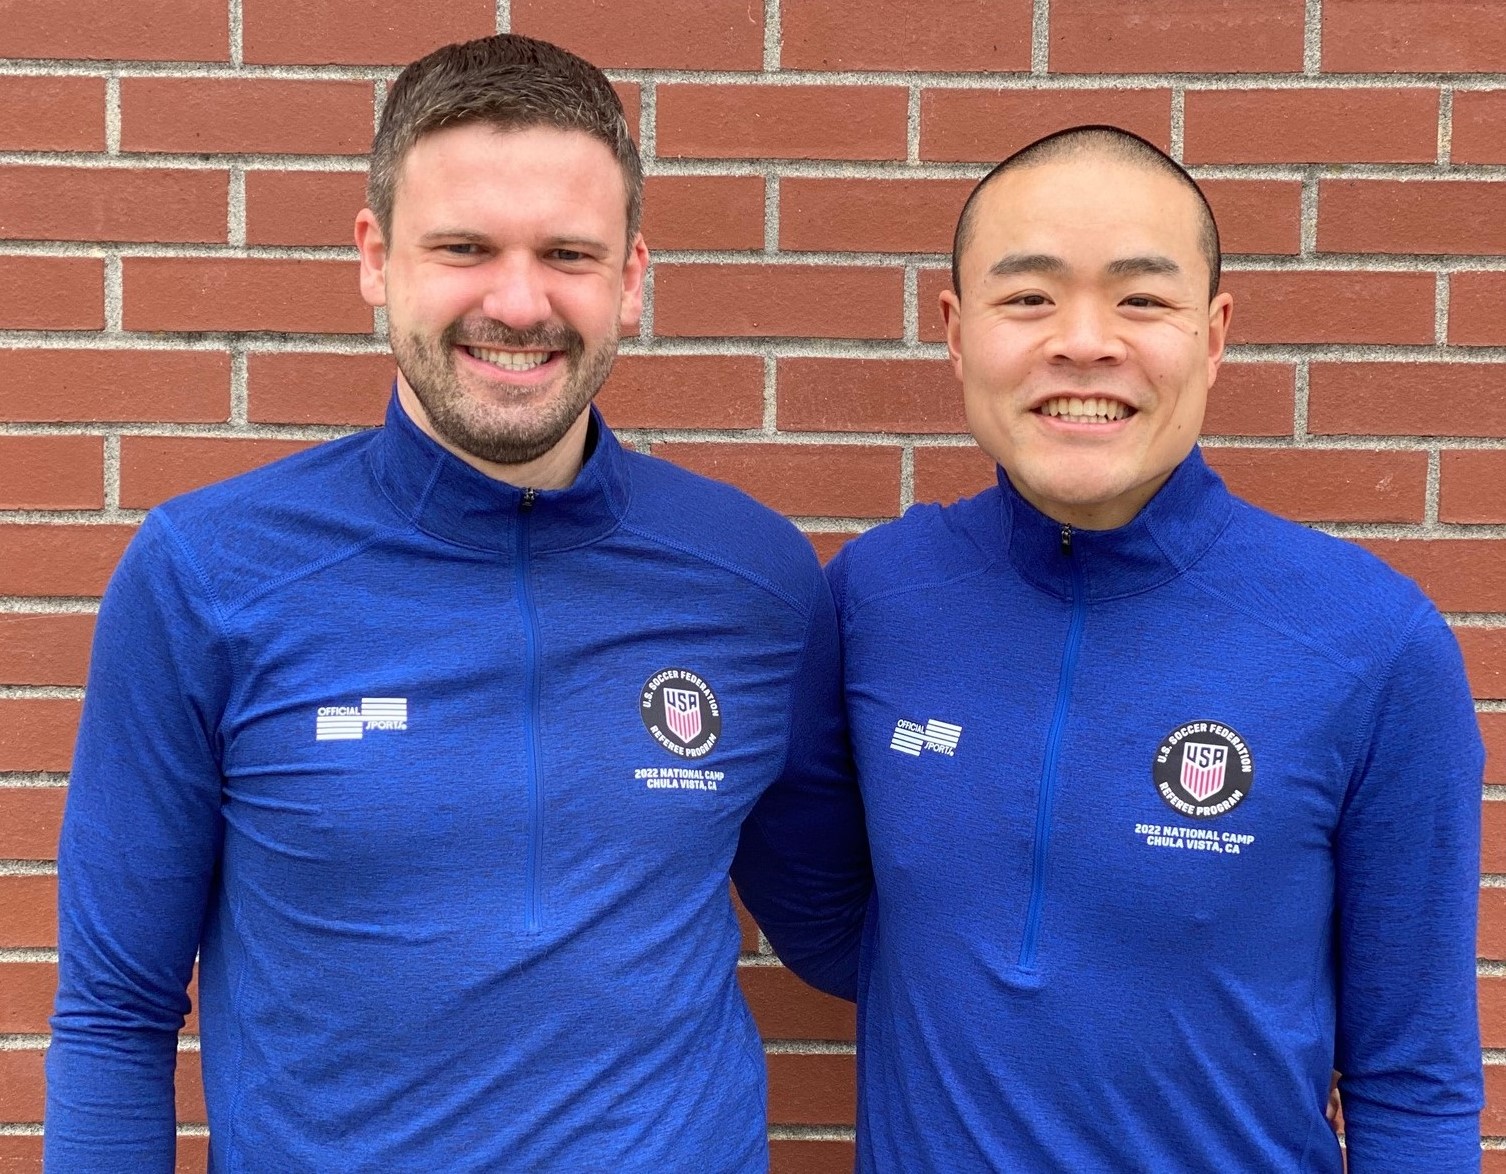 Two male referees in blue smiling together